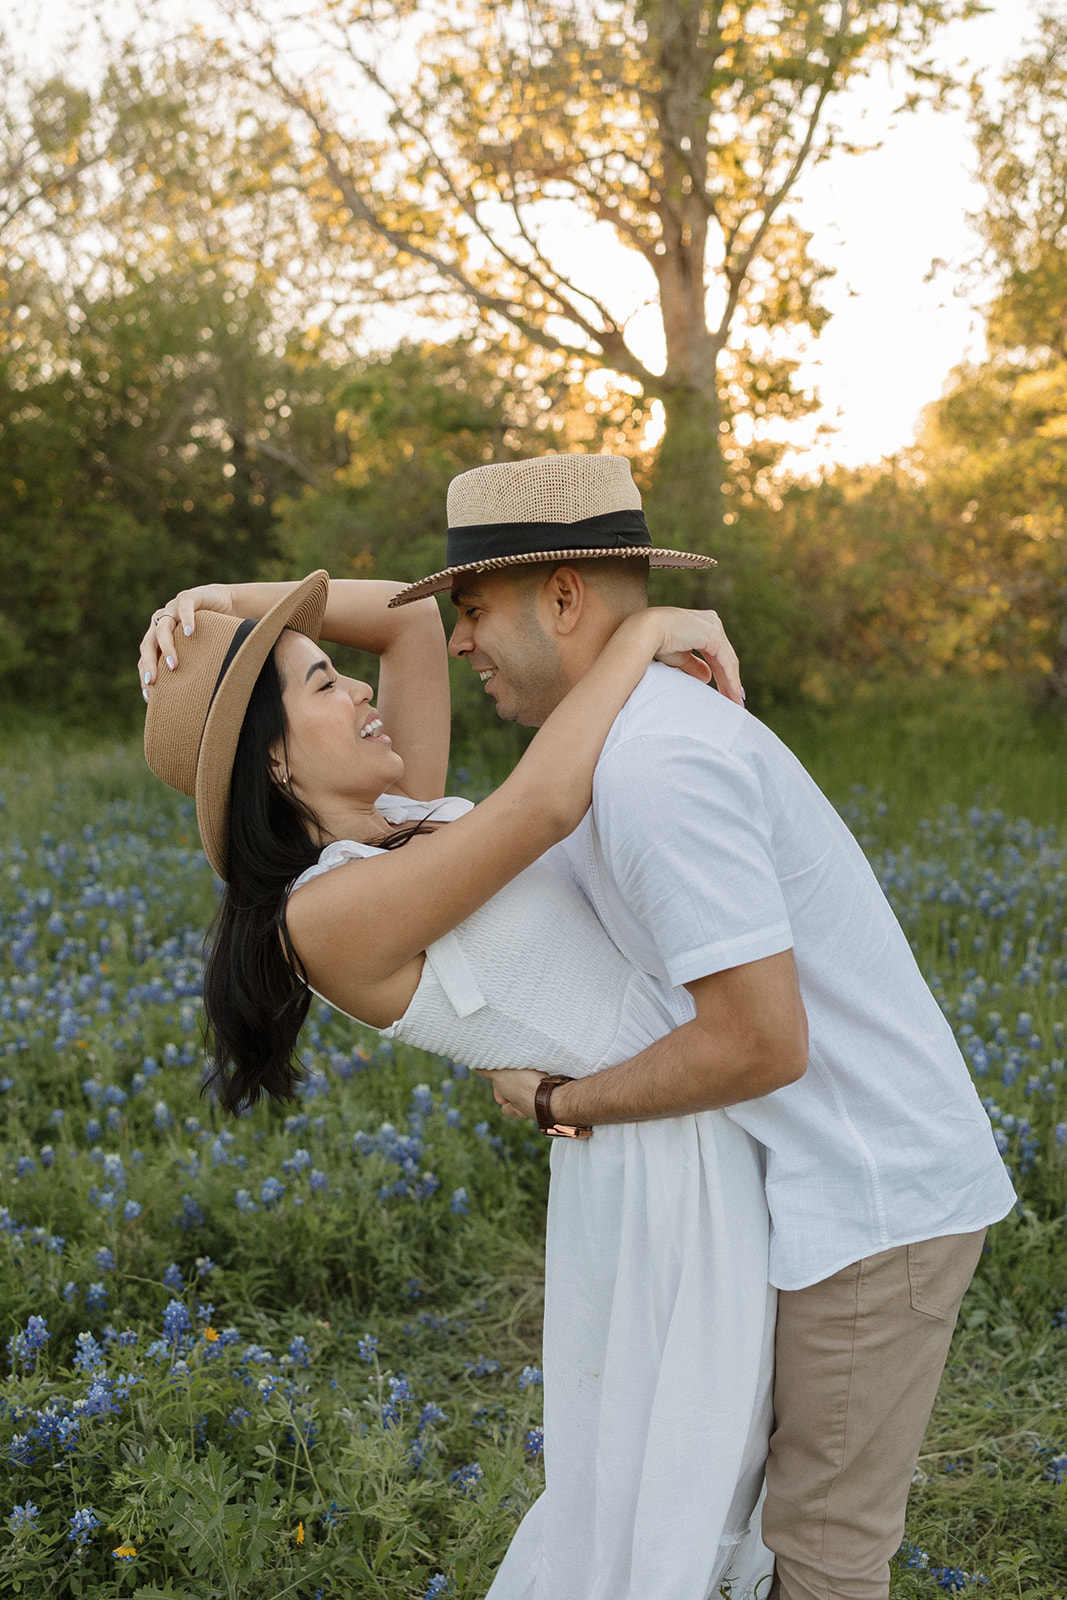 Couple dacning around in a field of Bluebonnets h at McKinney Falls state park